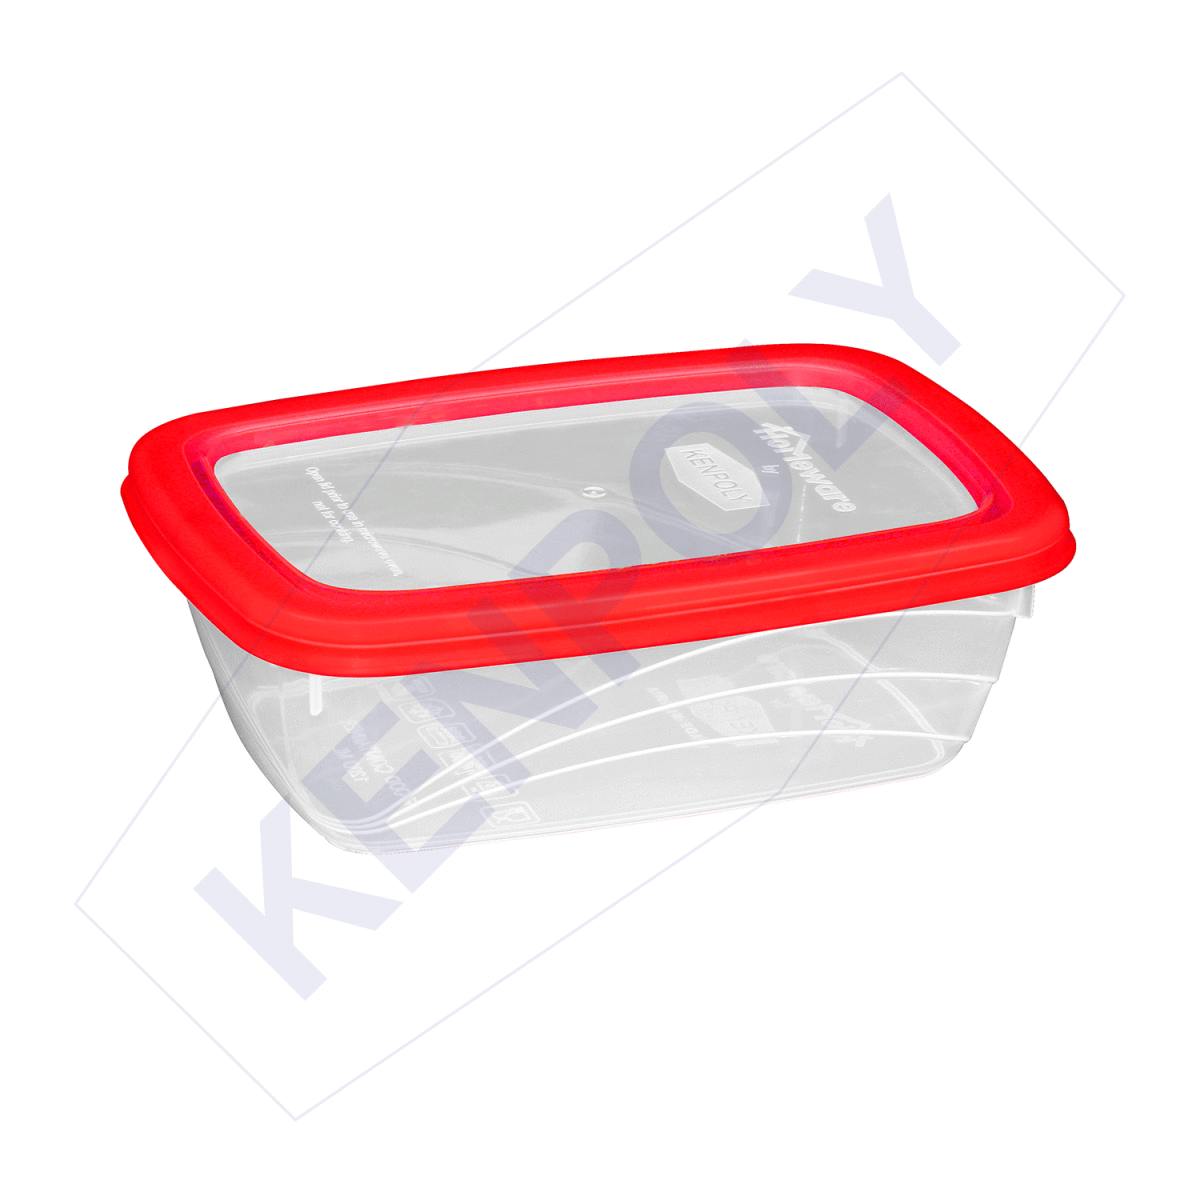 Homeware Food Container 600 ml